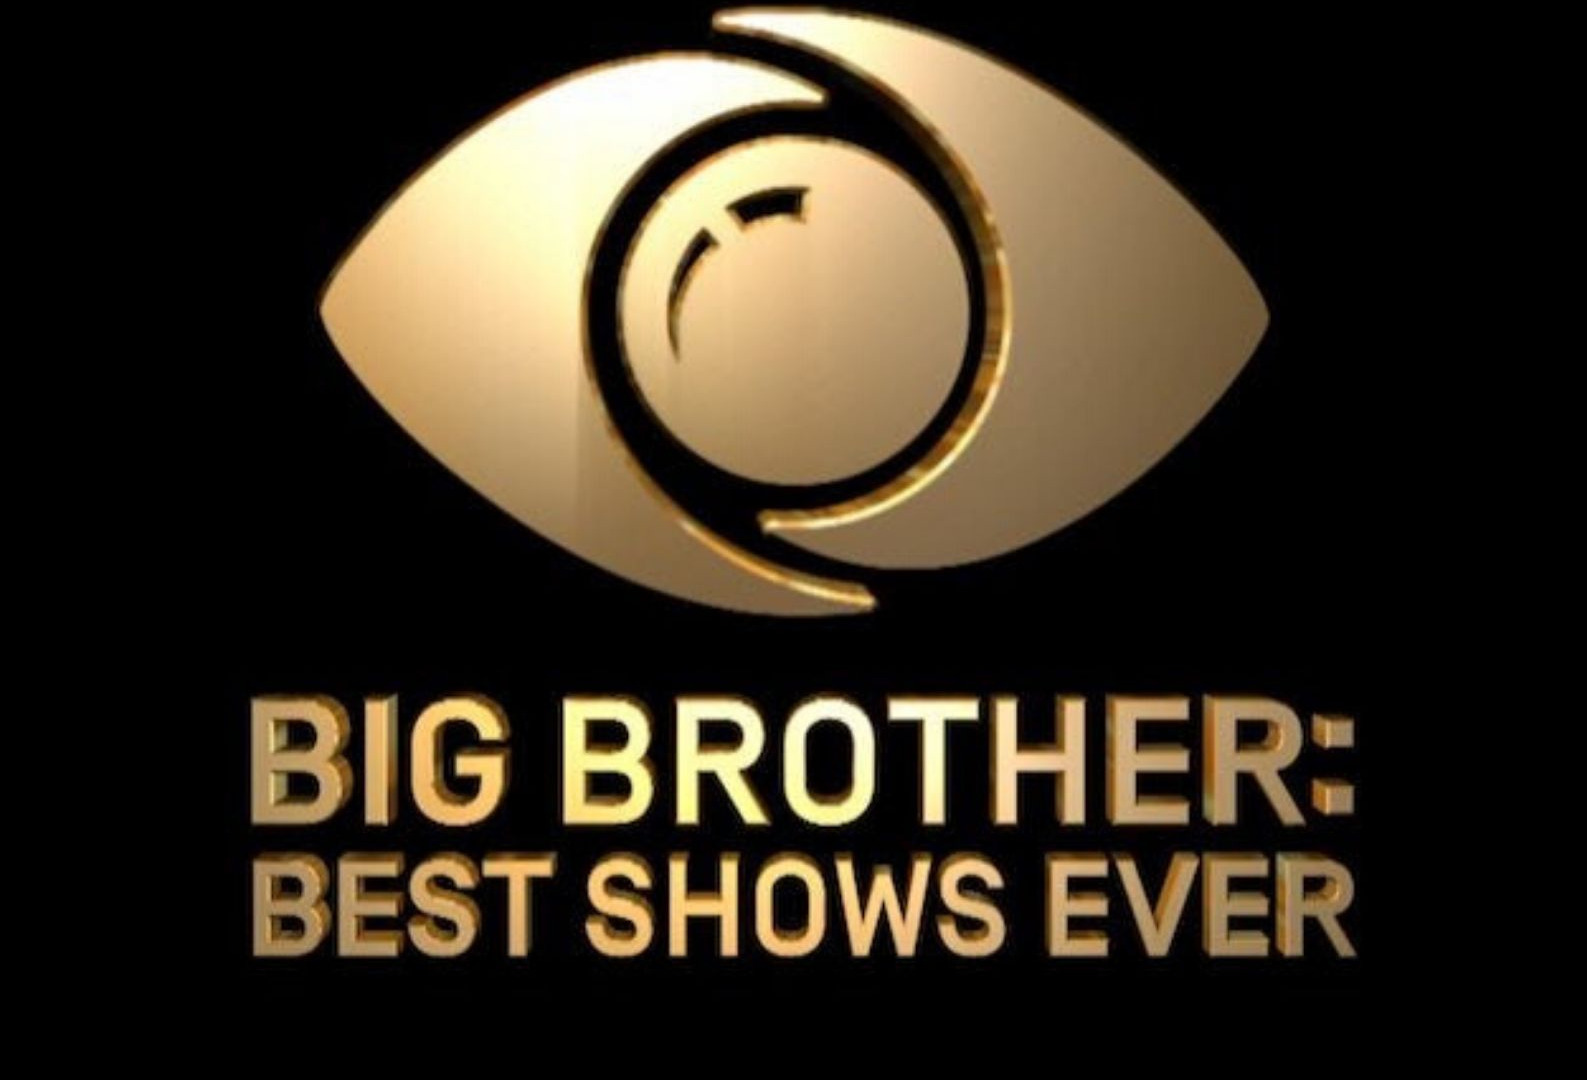 Show Big Brother: Best Shows Ever